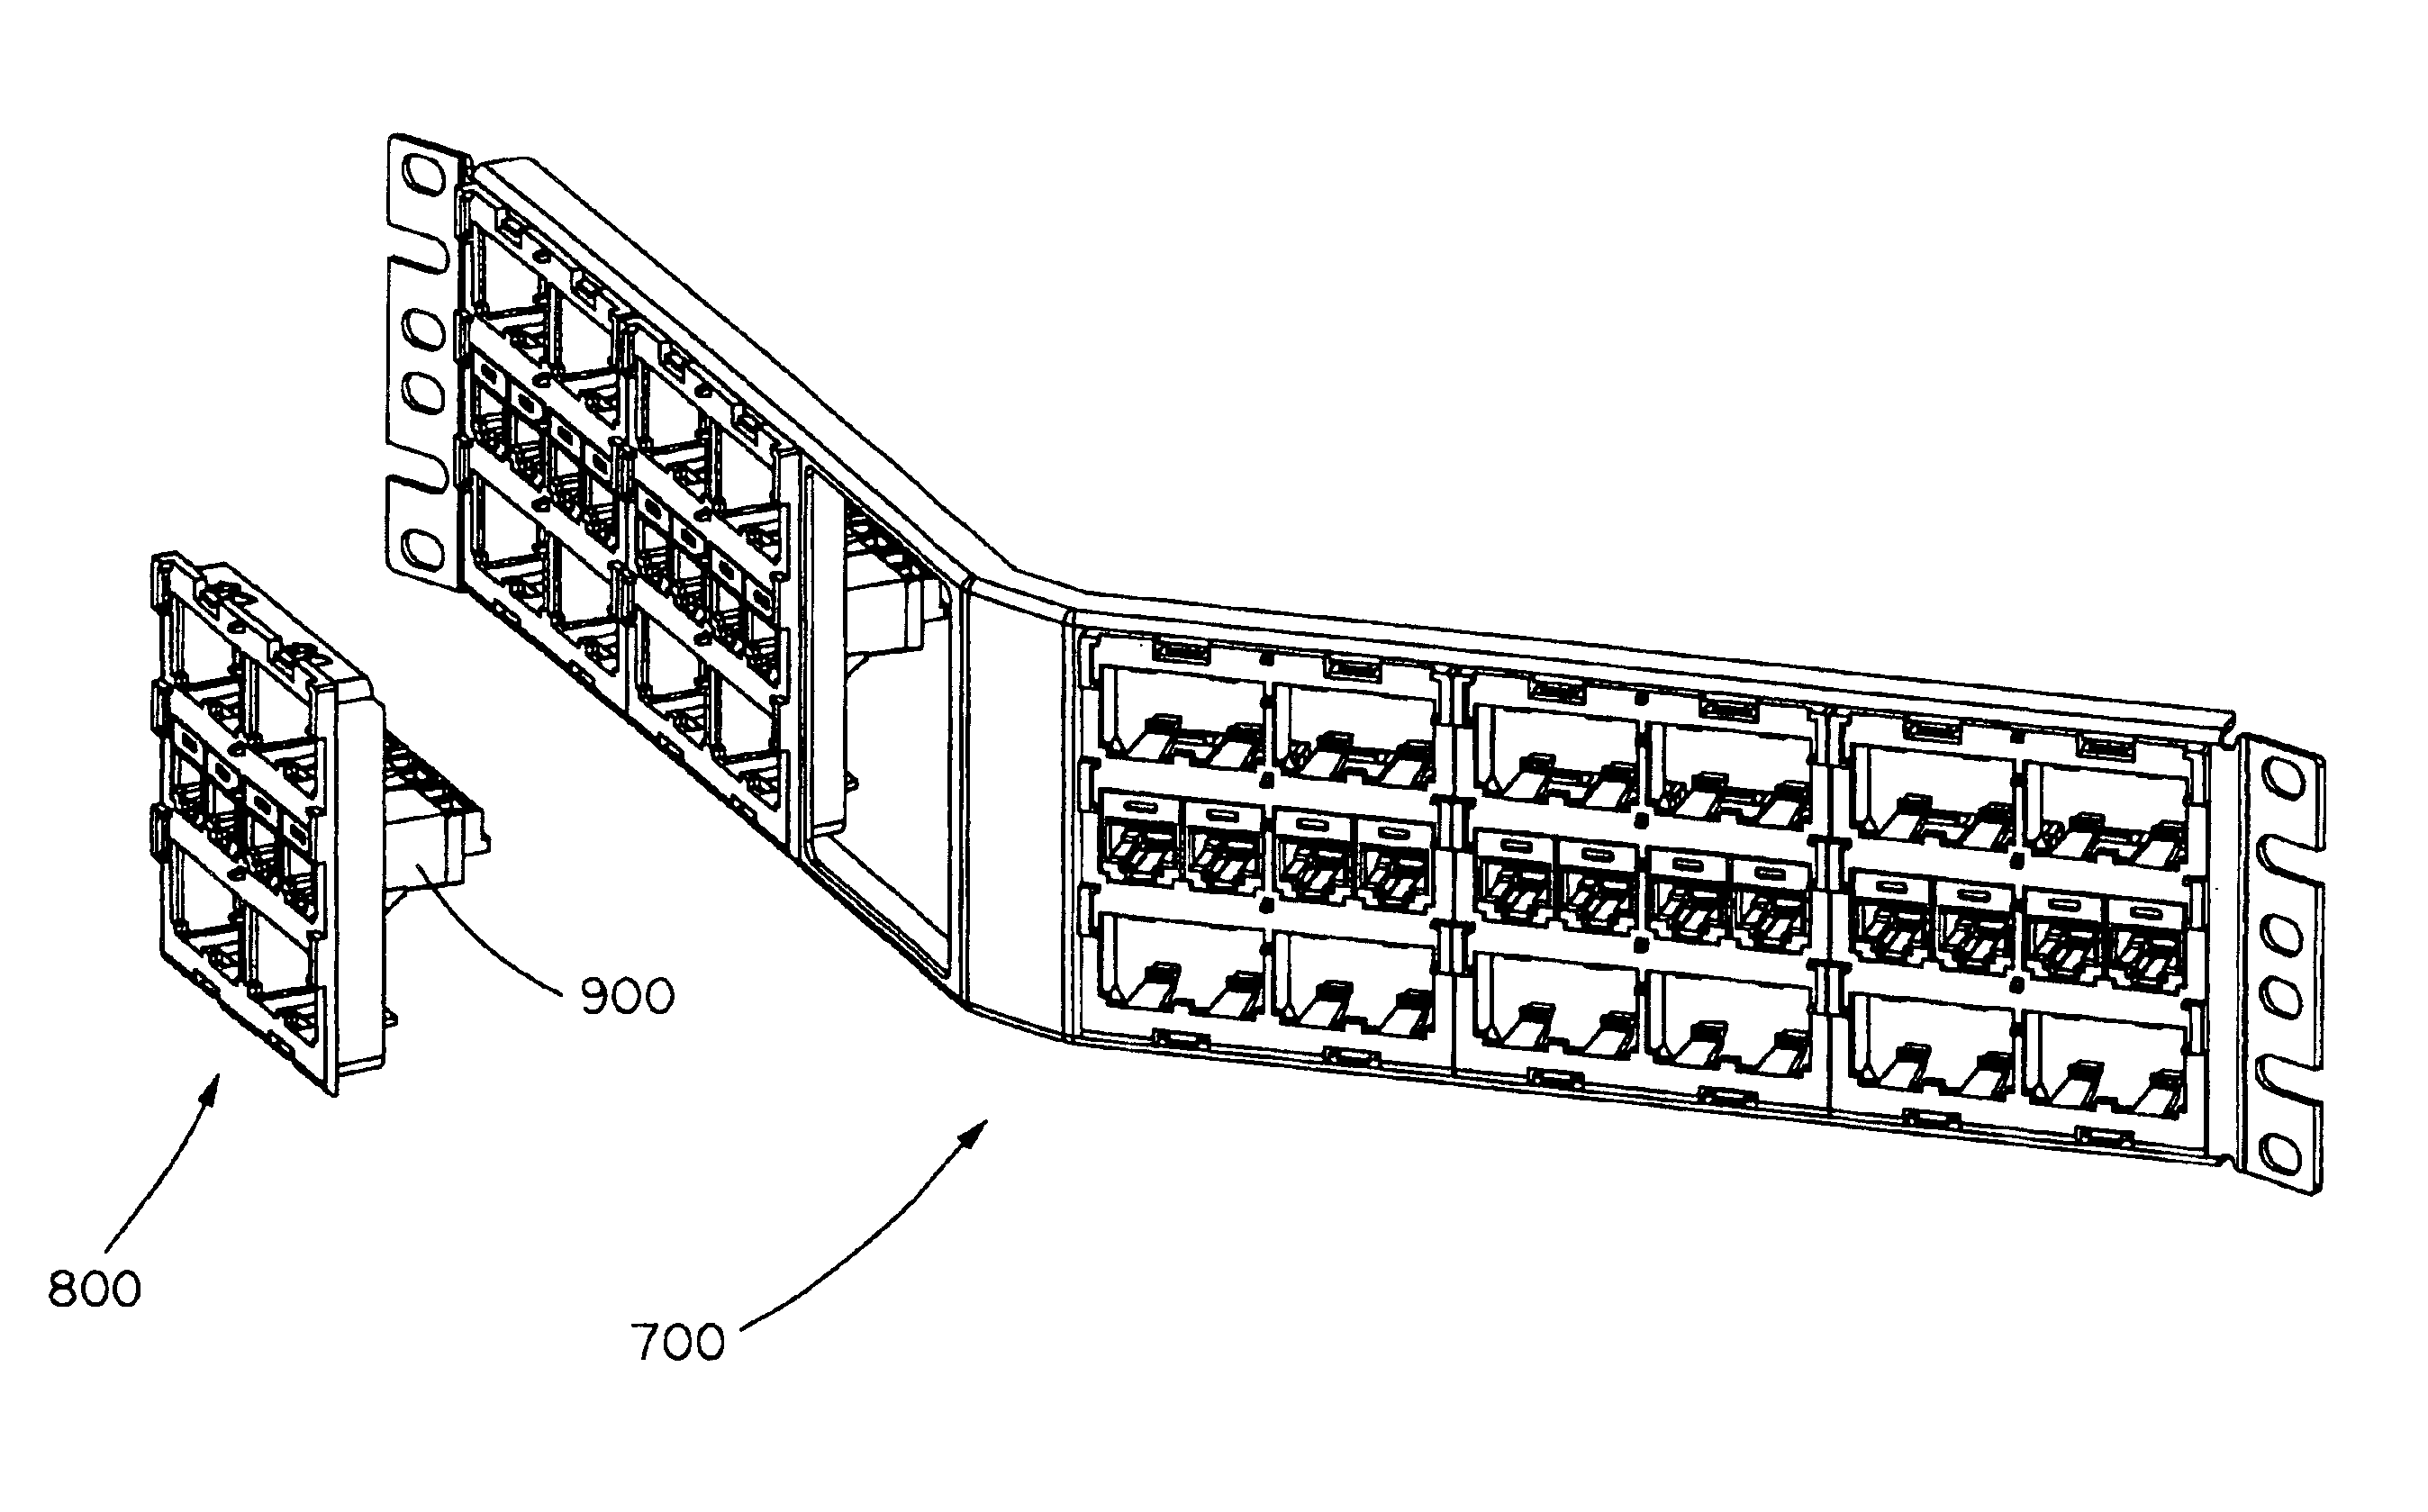 Angled patch panel with cable support bar for network cable racks